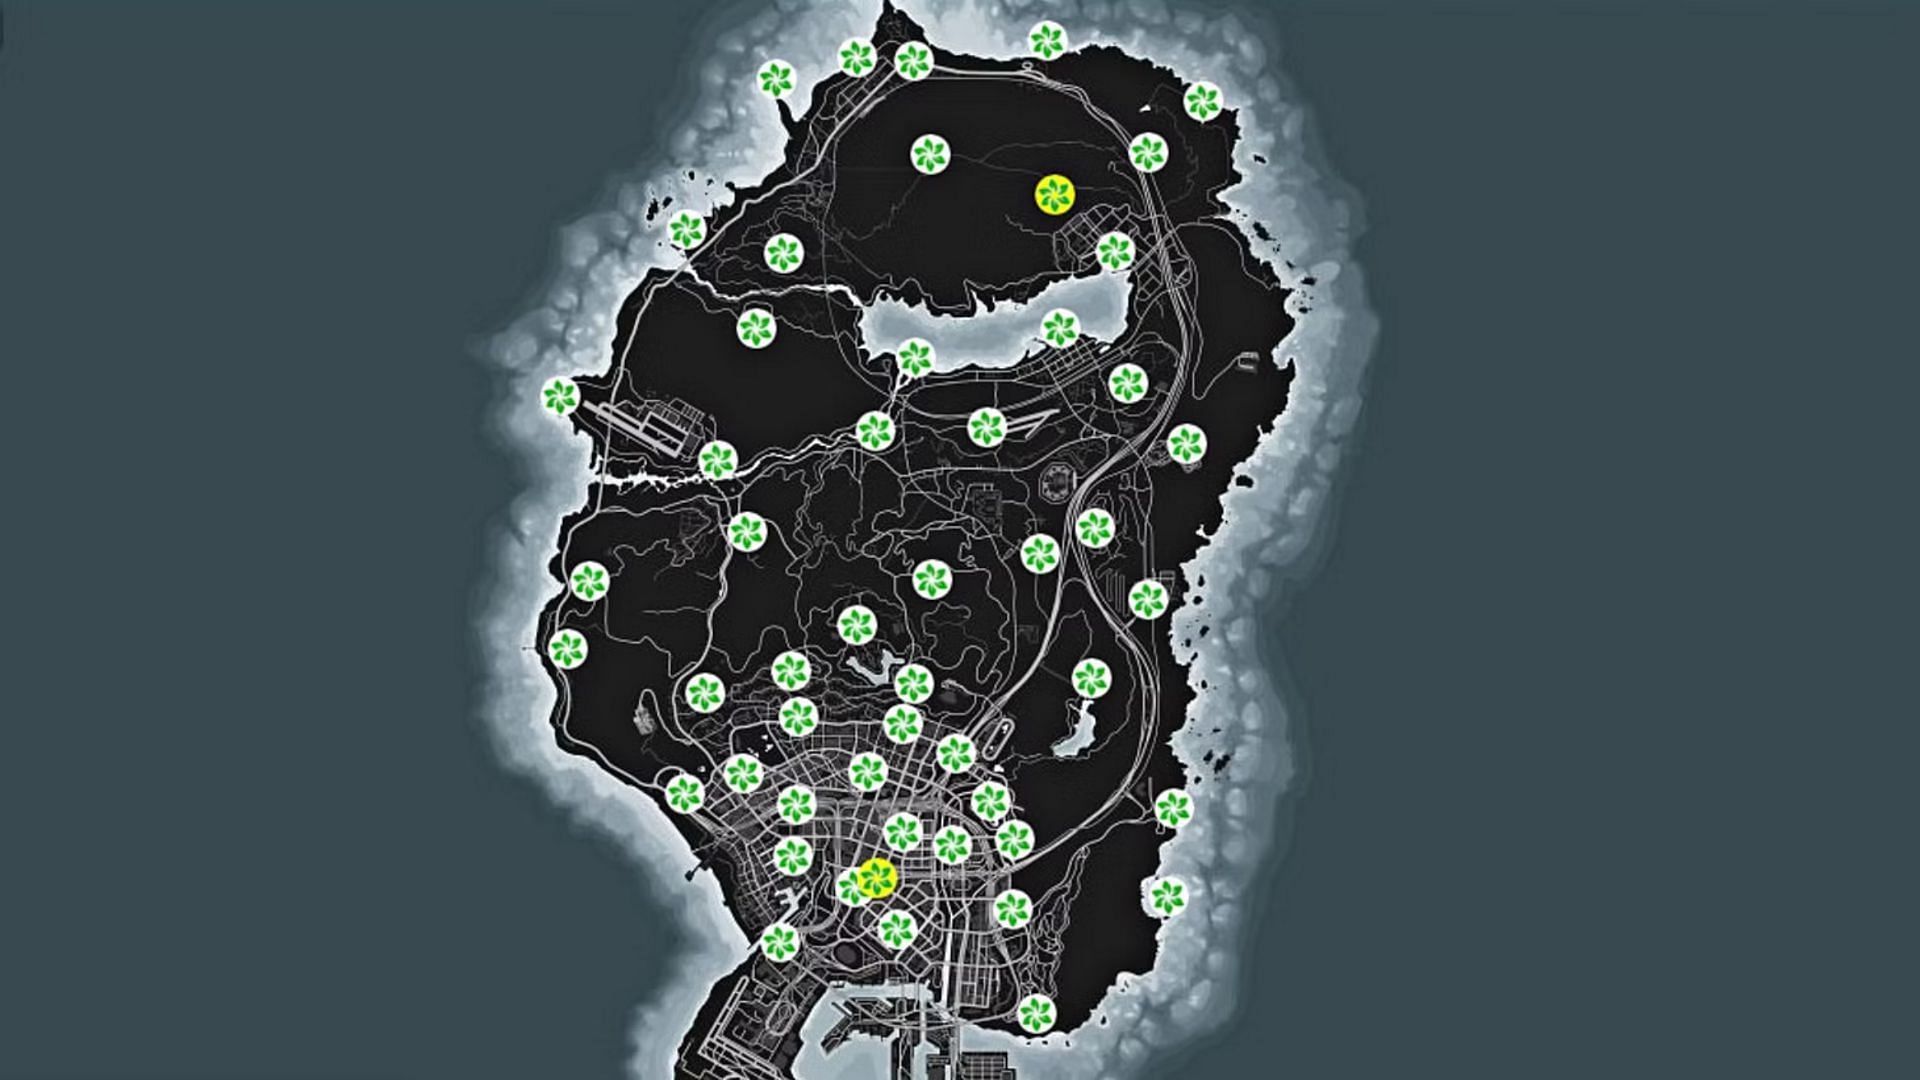 The location of all the currently available Peyote Plants in GTA Online (Image via gtaweb.eu)